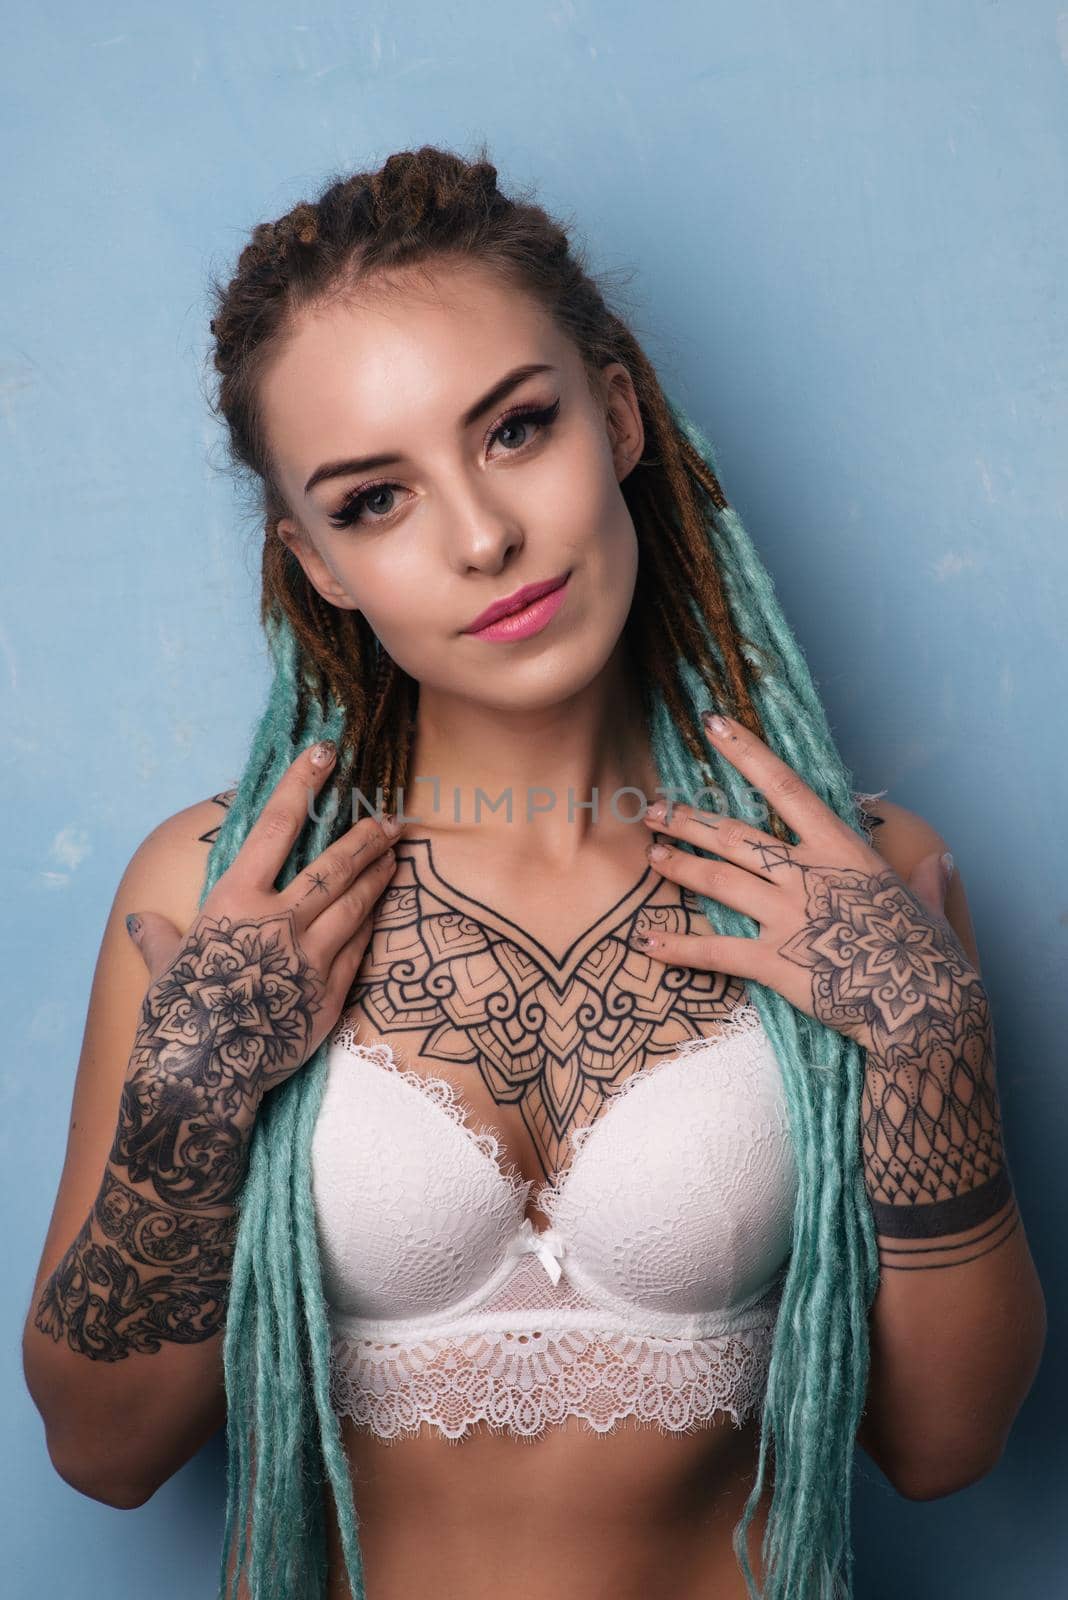 Sexual blonde girl with fascinating dreadlocks posing by the grunge wall. Pin-up style.